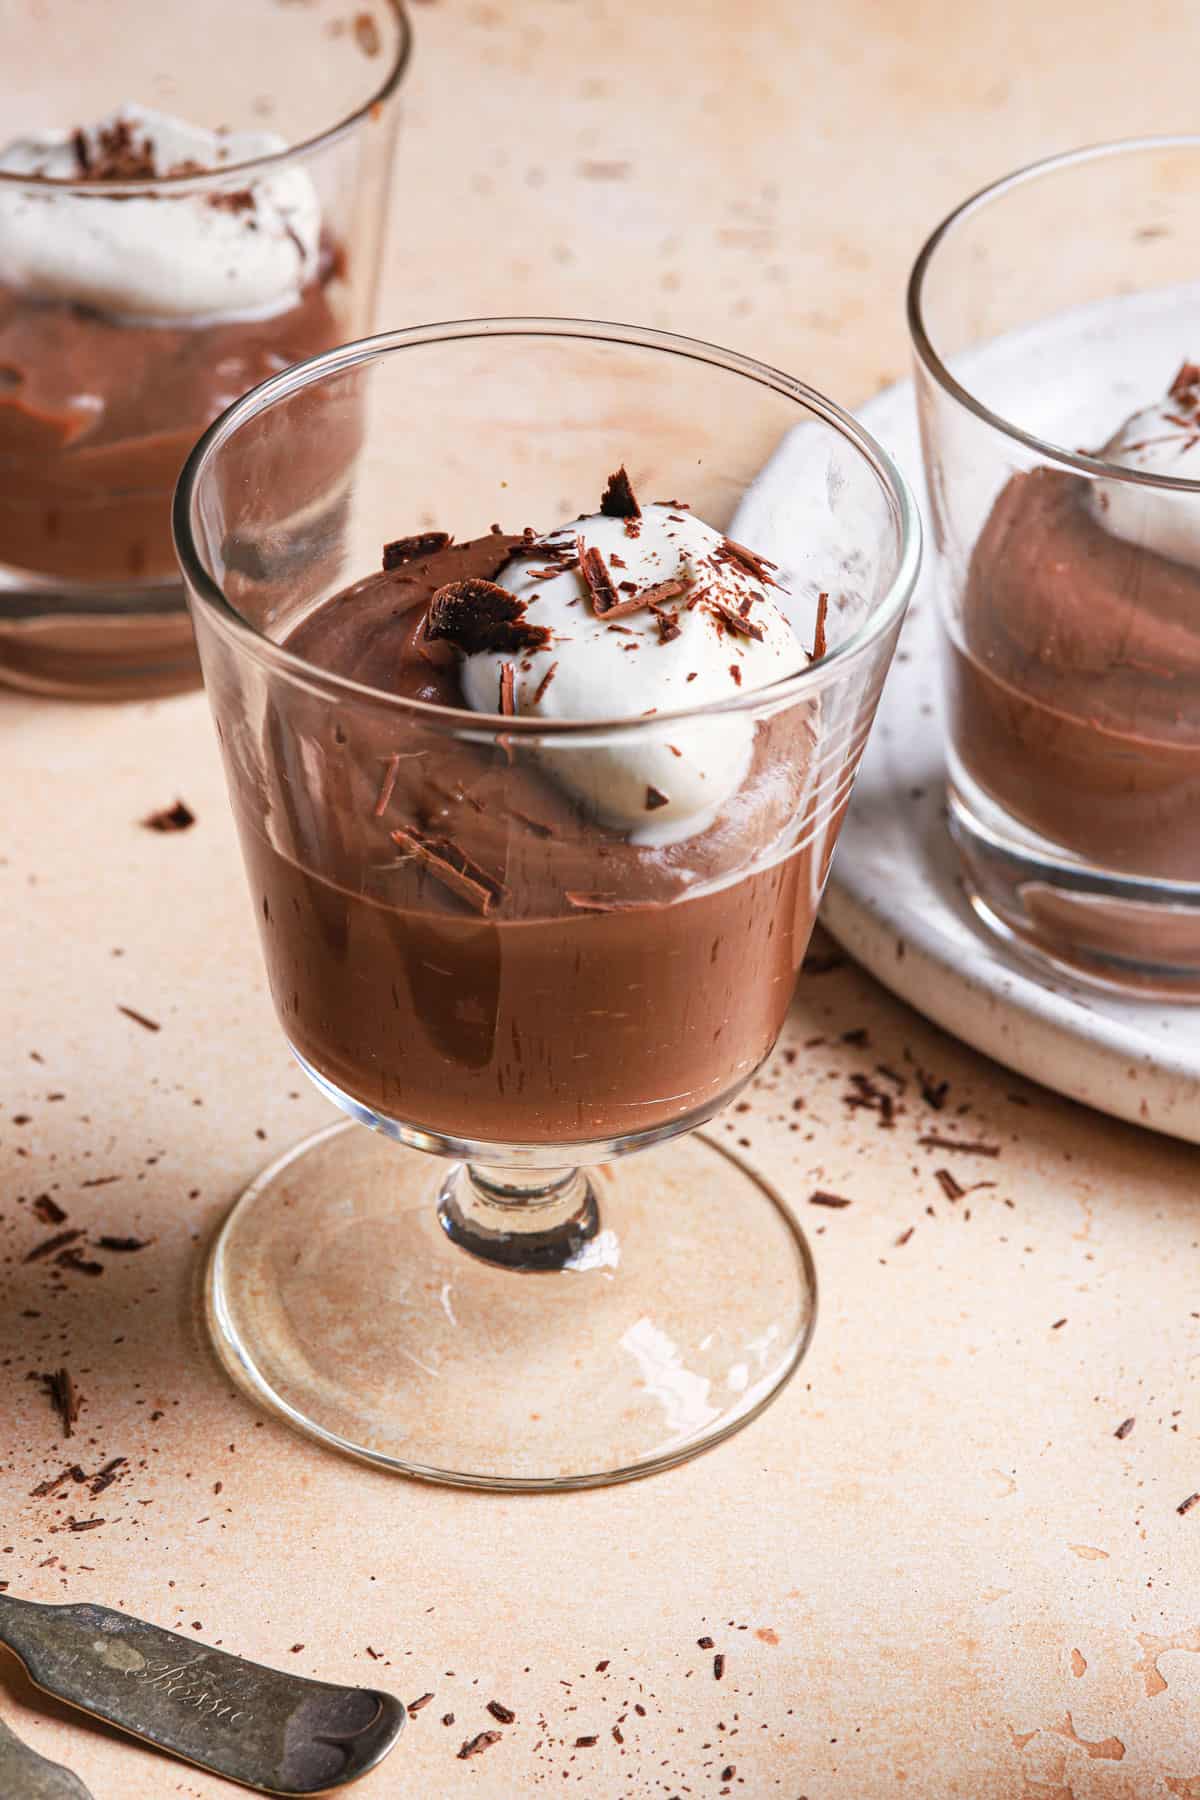 A close up of a glass of chocolate pudding with whipped cream and chocolate shavings with two cups behind it.